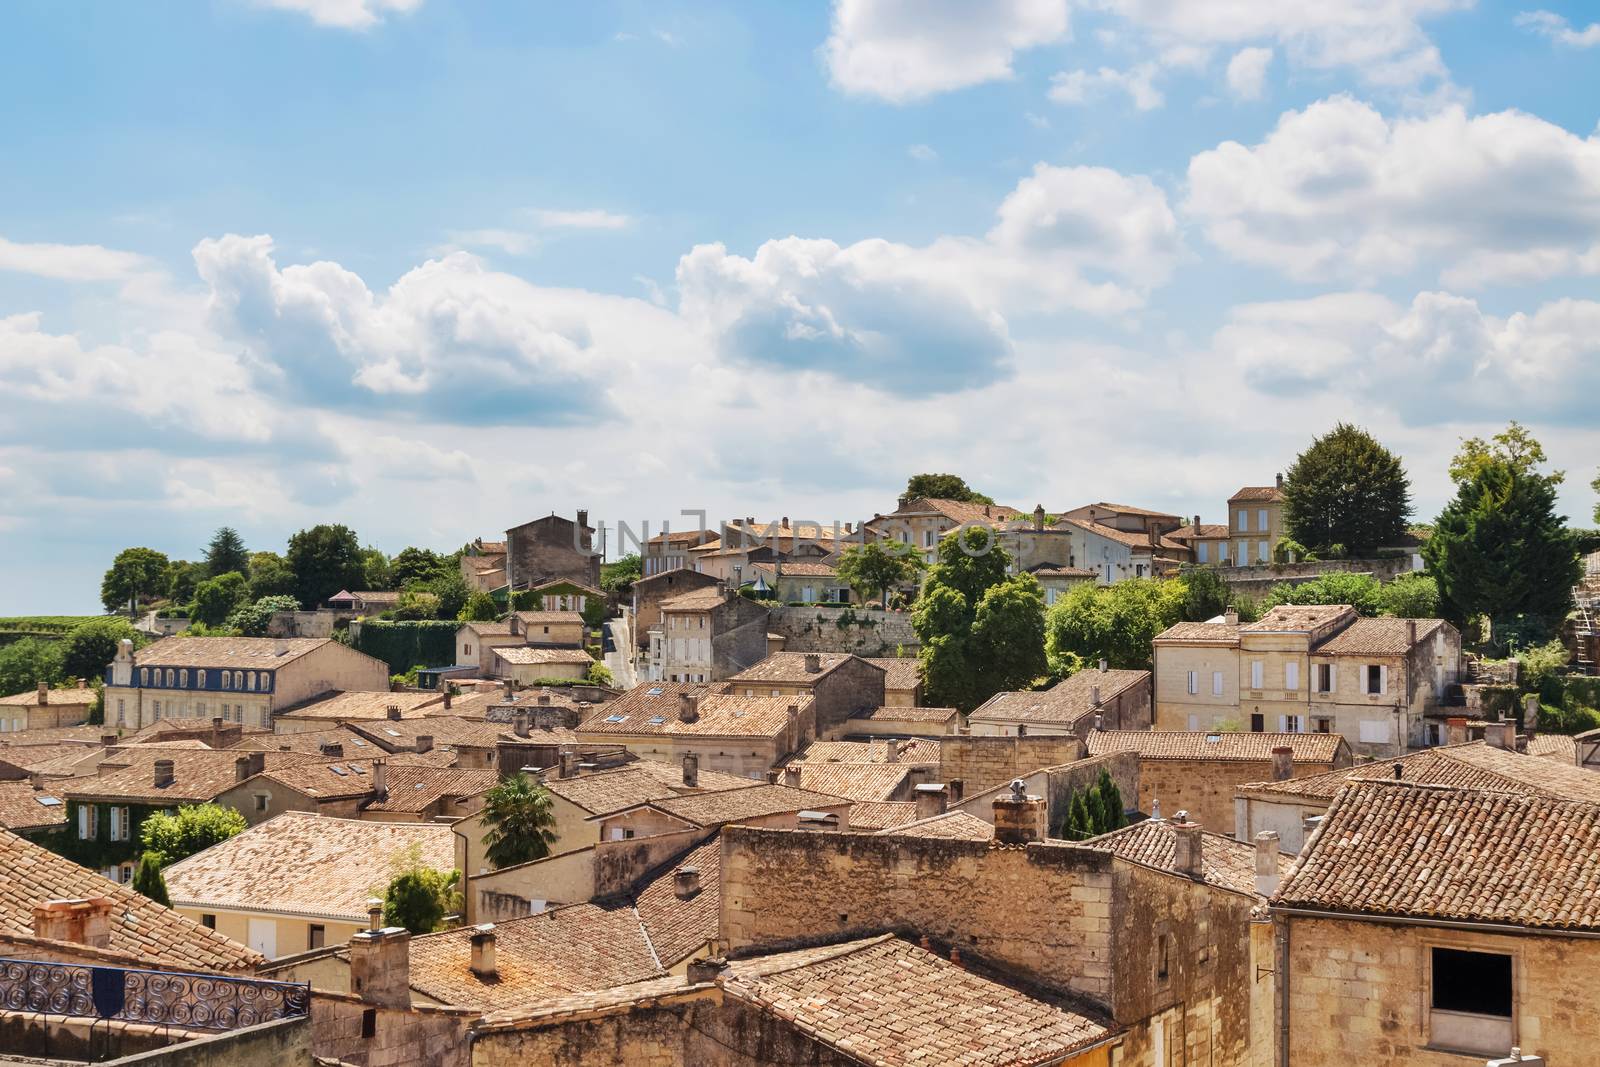 View over picturesque rooftops of Saint-Emilion, France by anikasalsera